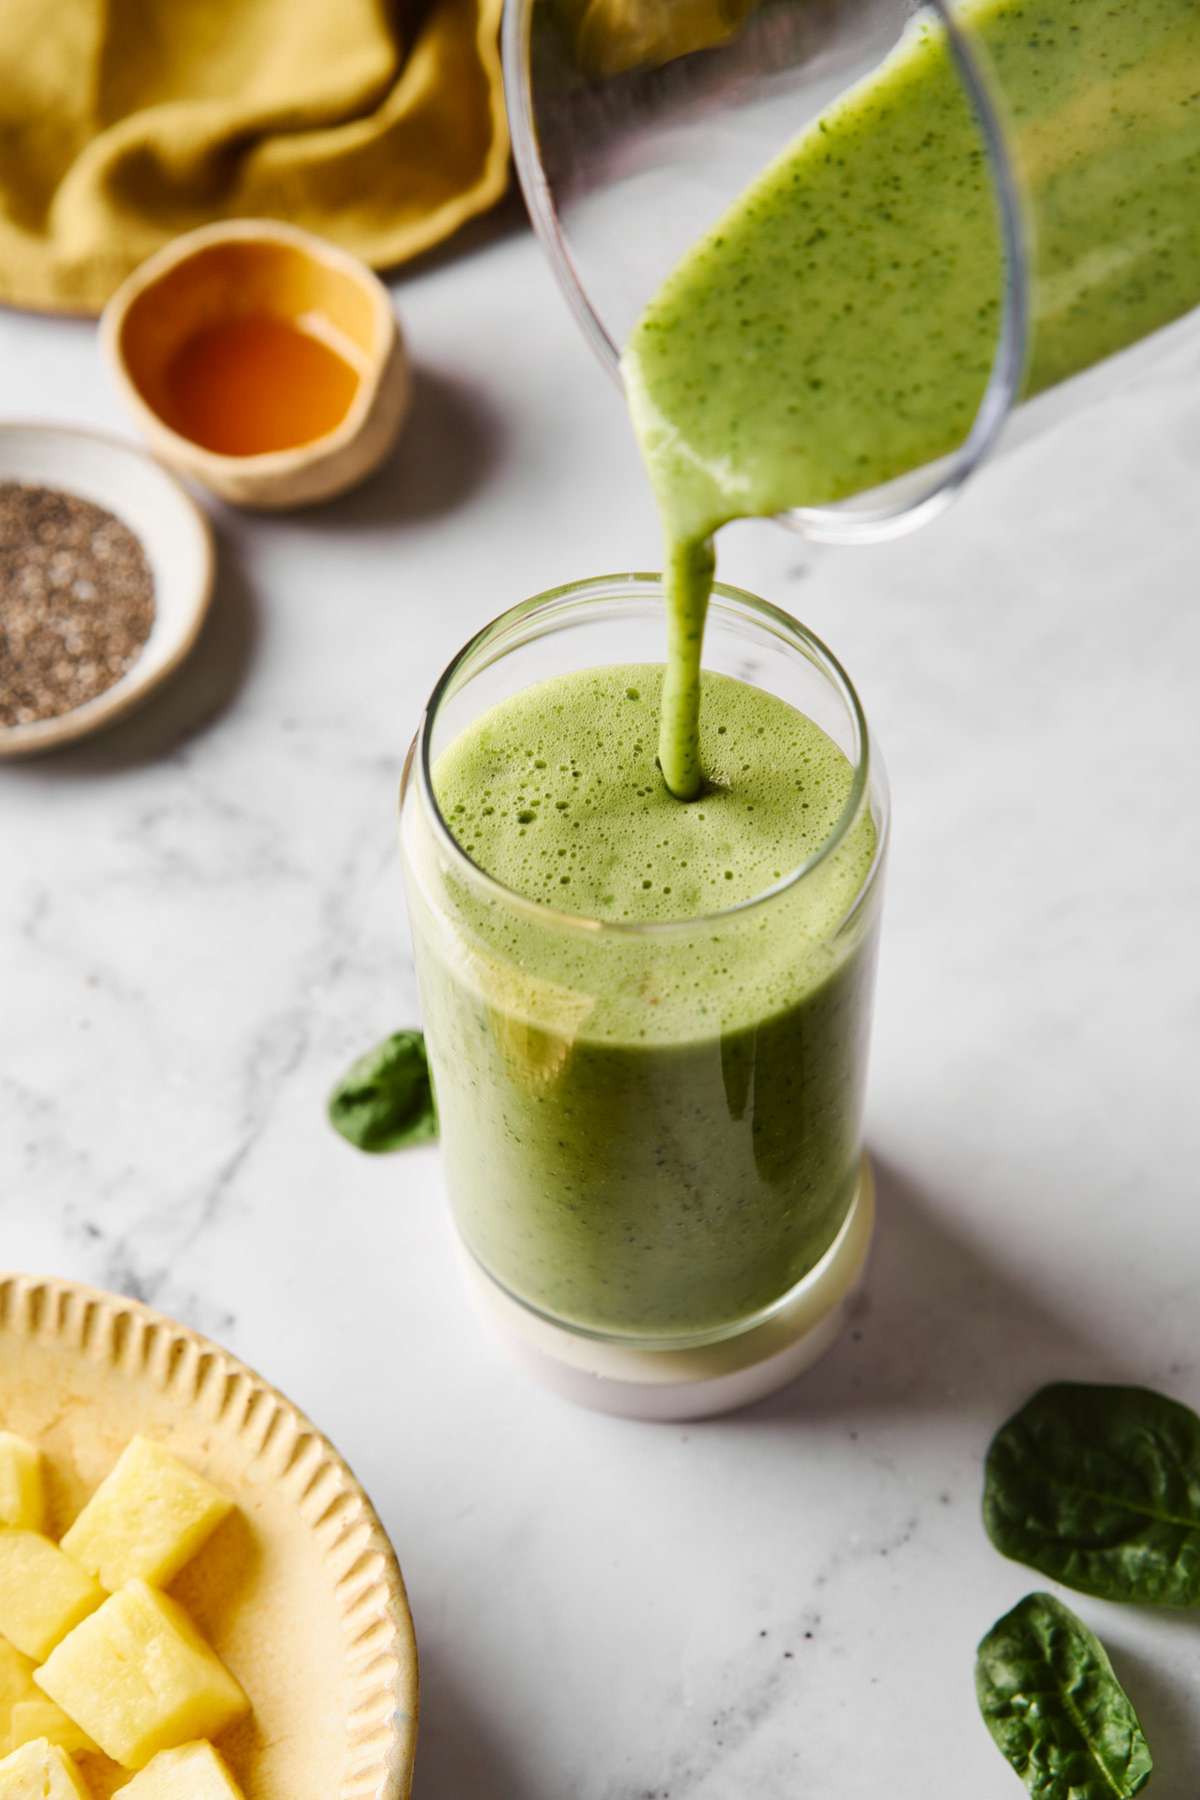 Pouring a green smoothie from a blender into a glass.